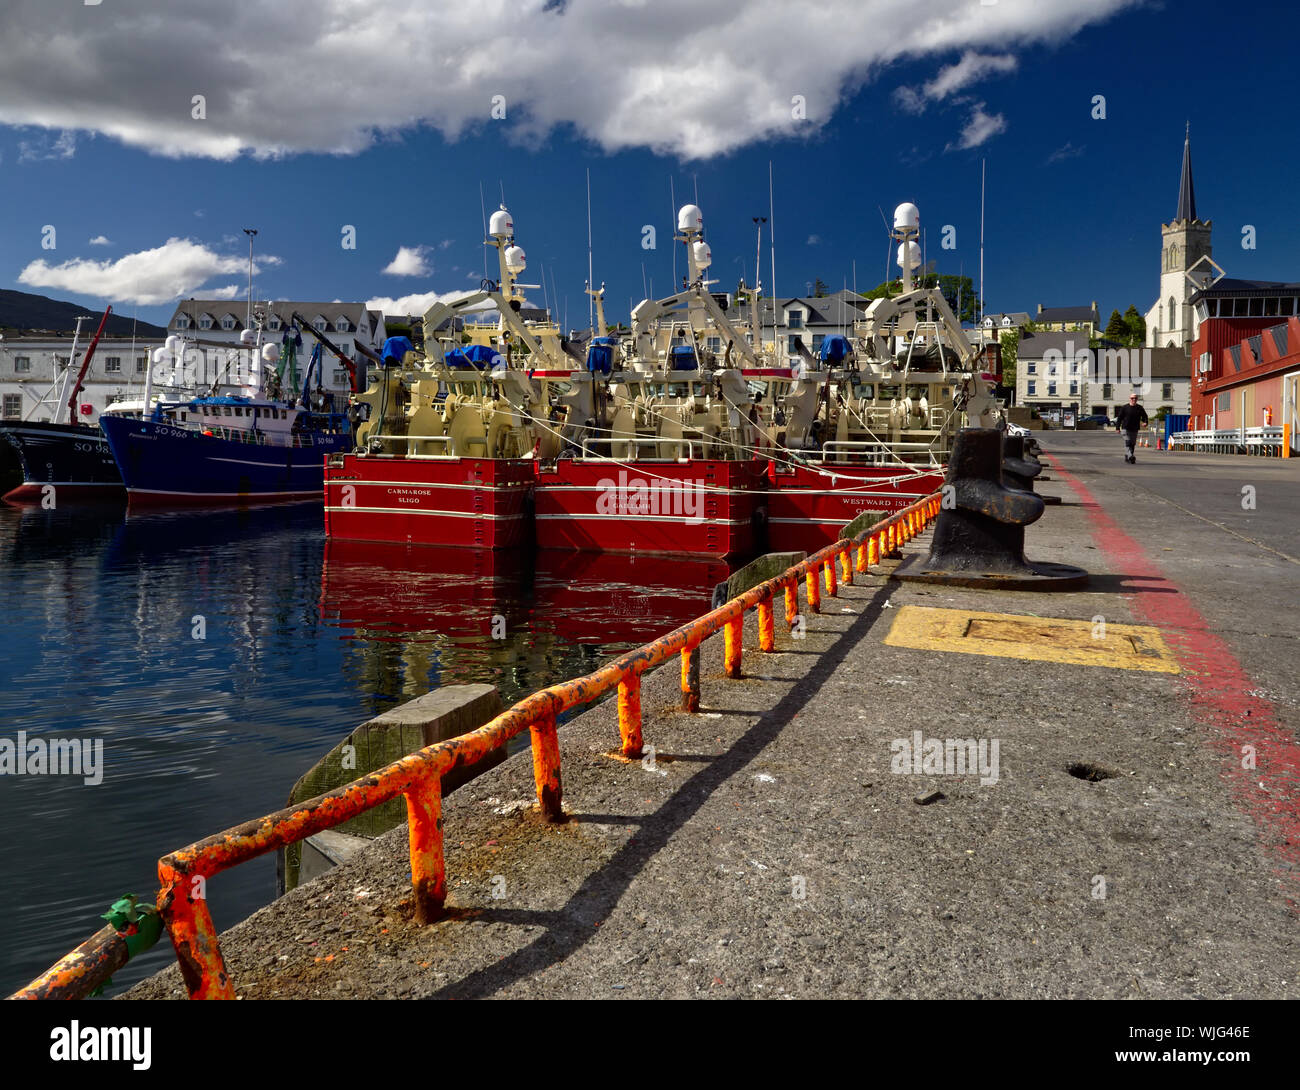 Killybegs, Co. Donegal, Ireland - May 21st, 2019 - Three identical red fishing vessels moored side by side at the pier in Killybegs Harbour (rear view Stock Photo